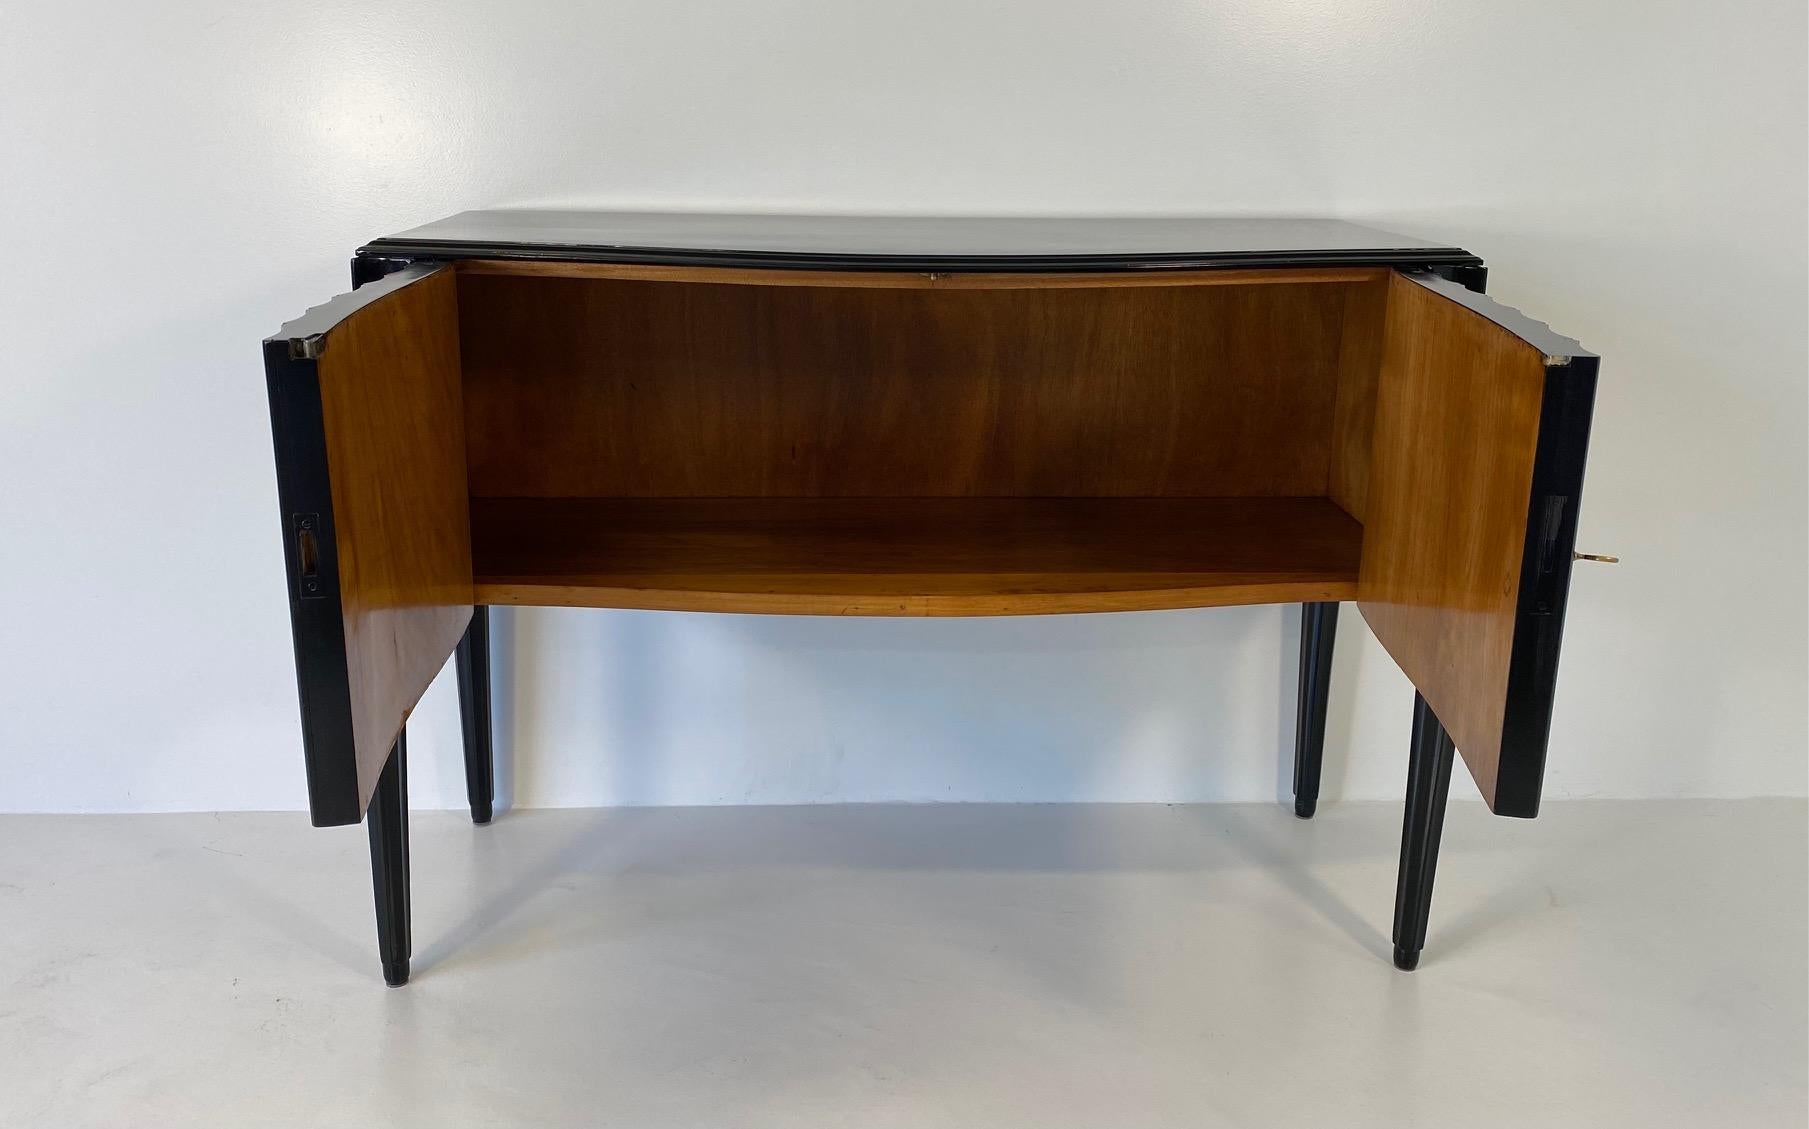 Italian Art Deco Black Lacquer Sideboard, 1940s, Attr. to Ulrich 5